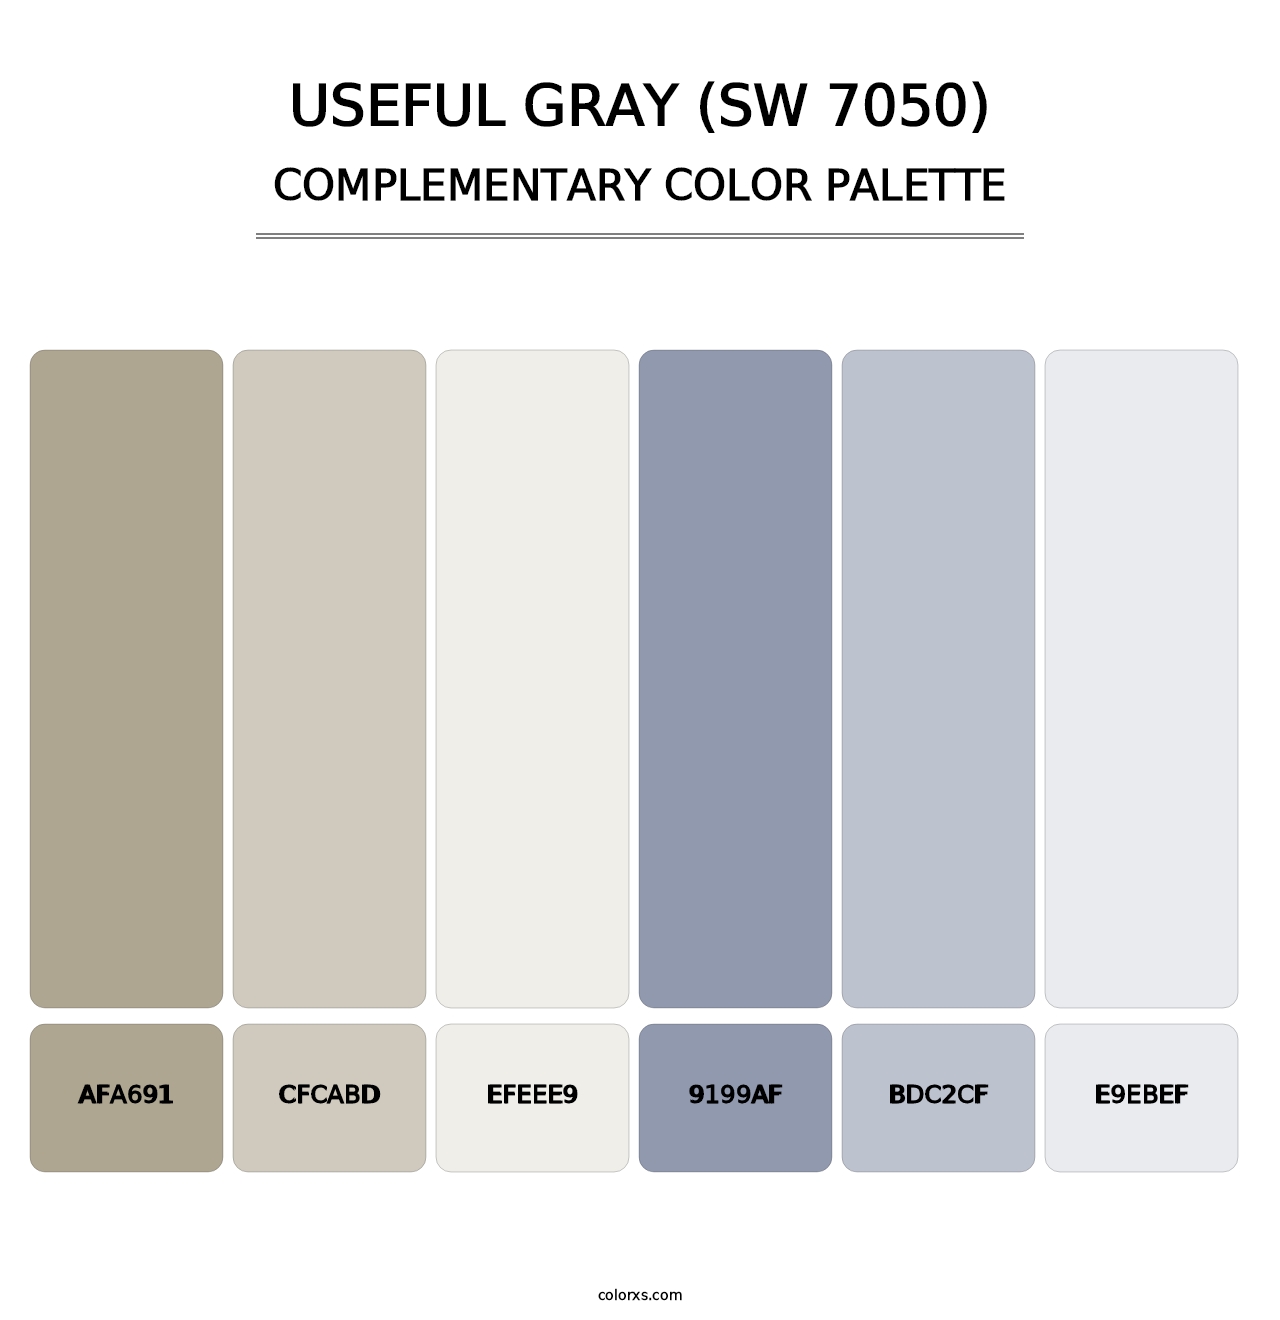 Useful Gray (SW 7050) - Complementary Color Palette